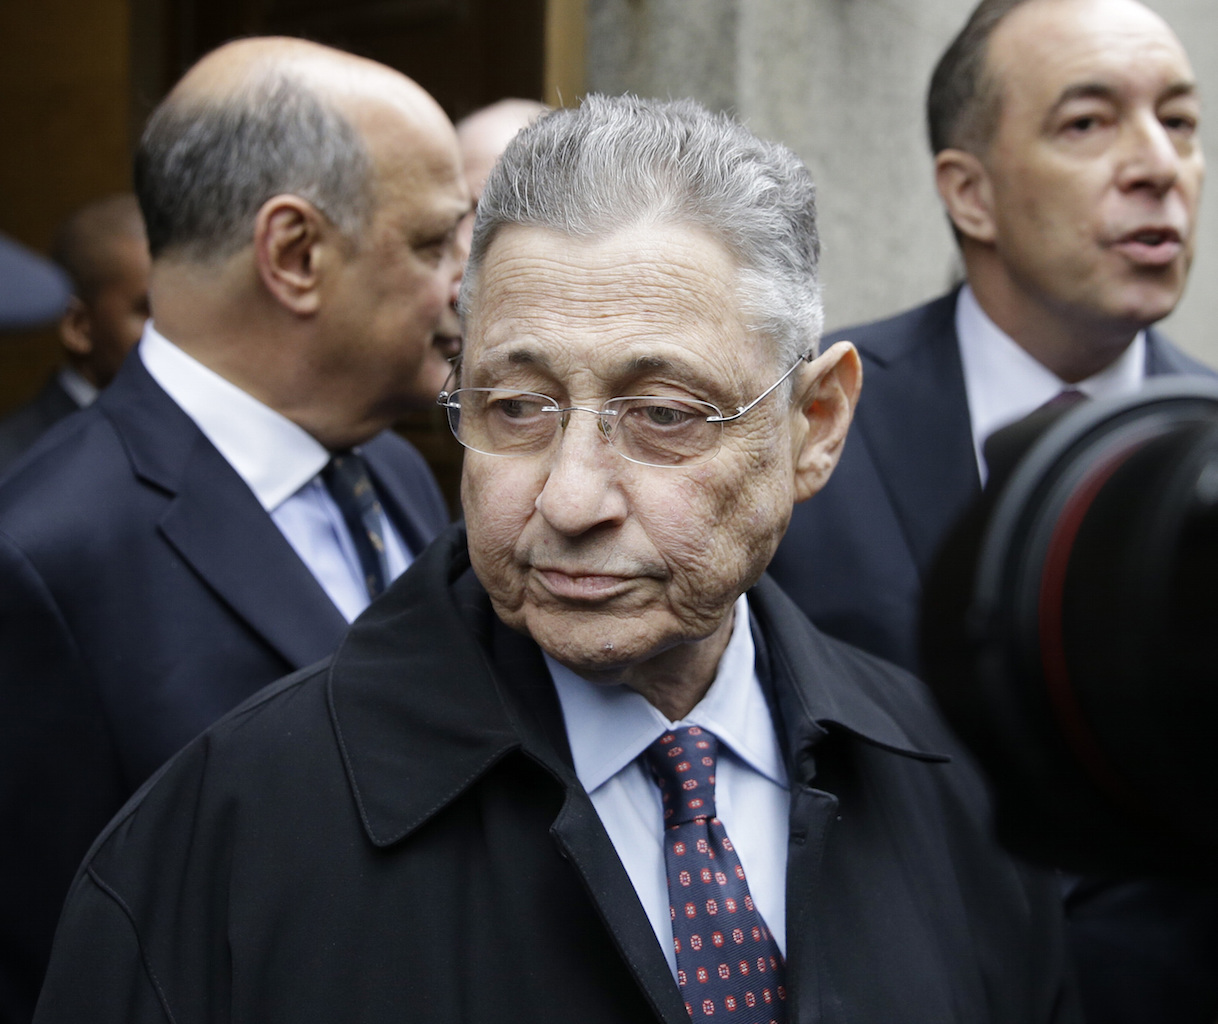 With an unfamiliar look of resignation on his face, the once-powerful former Assembly Speaker Sheldon Silver leaving court on Tuesday. AP Photo/Seth Wenig